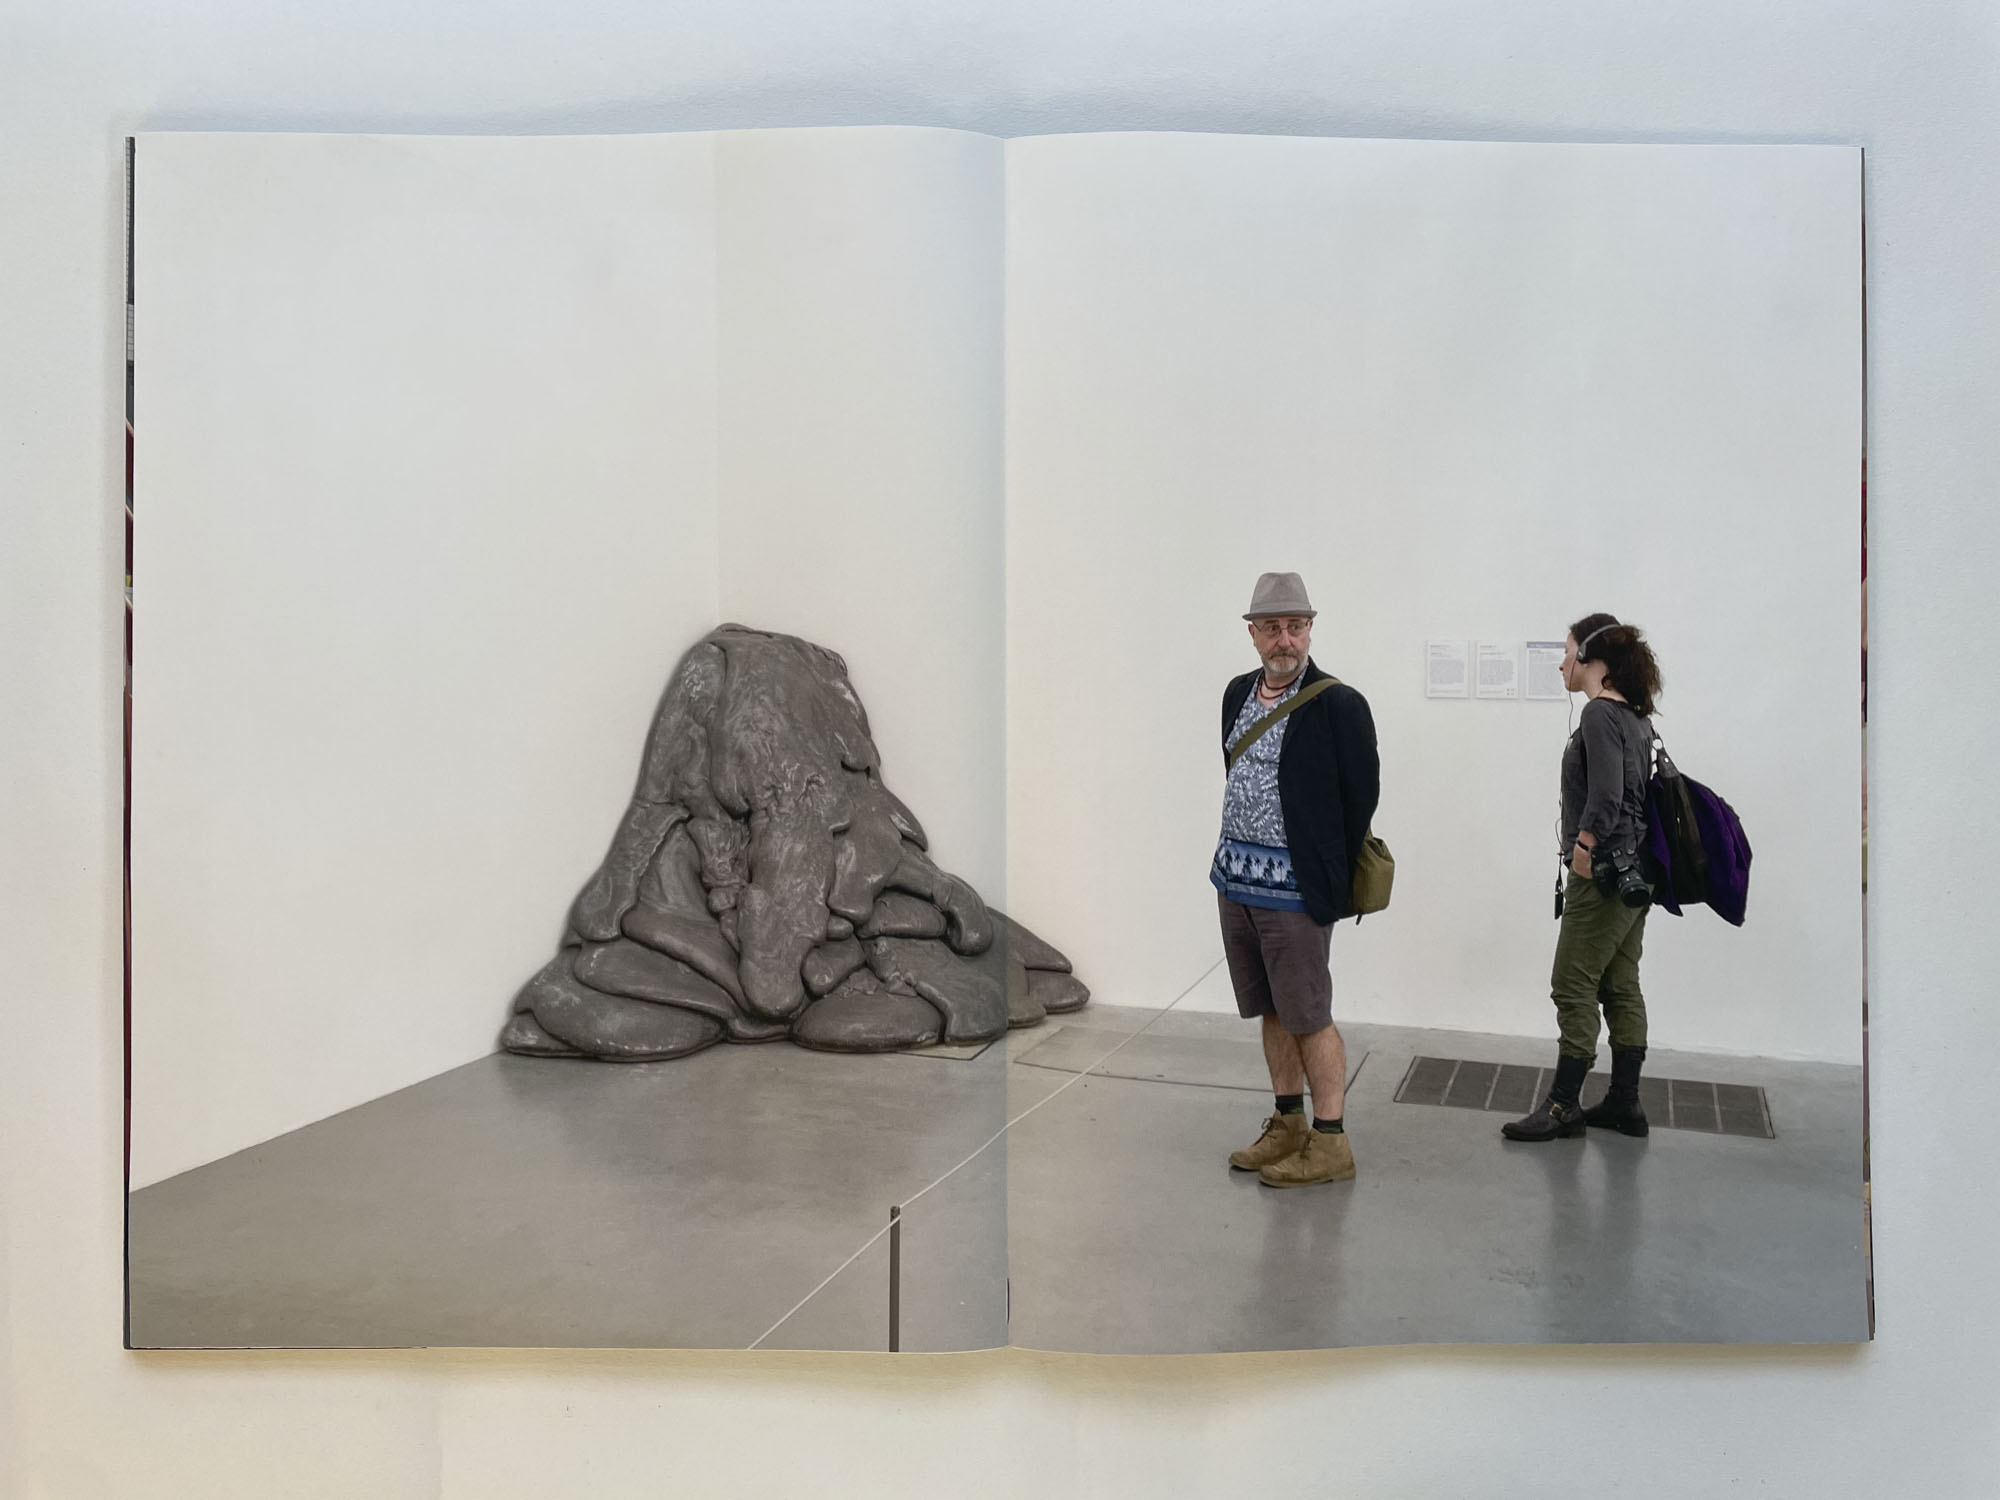 in the corner of an art gallery is a melted sculpture, one person looks at it, another looks away